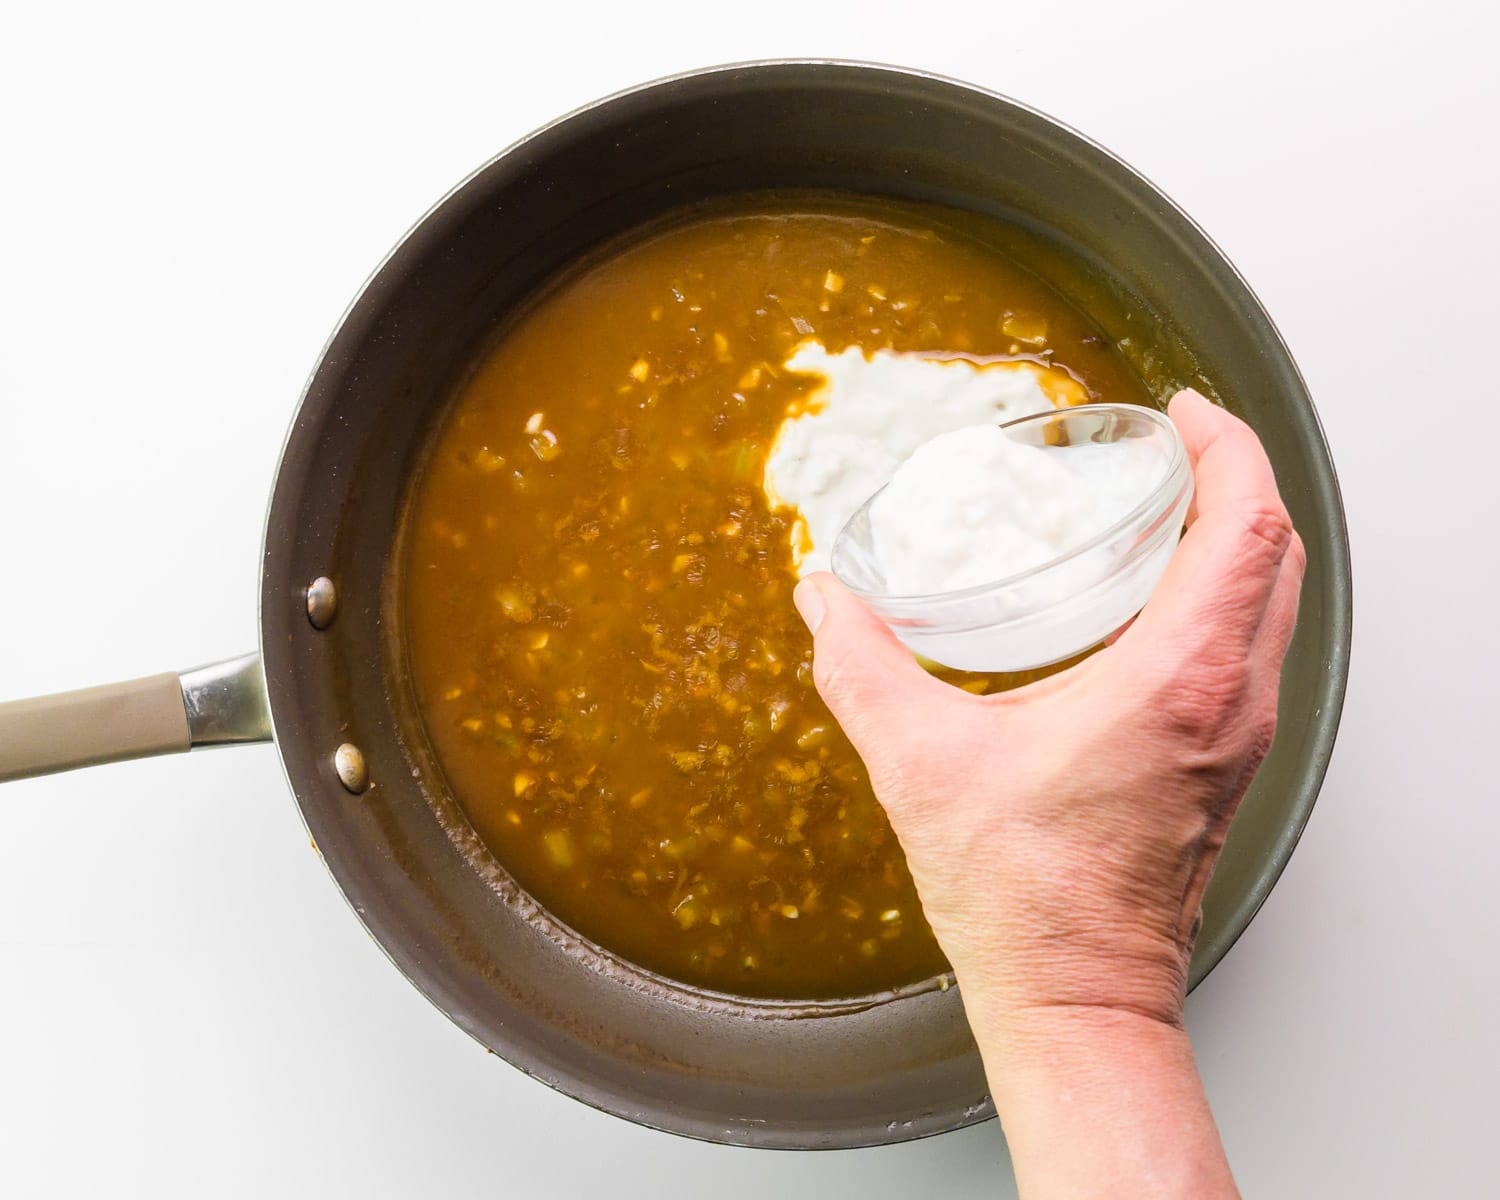 A hand holds a bowl of vegan sour cream, pouring it into a skillet with a brown sauce.